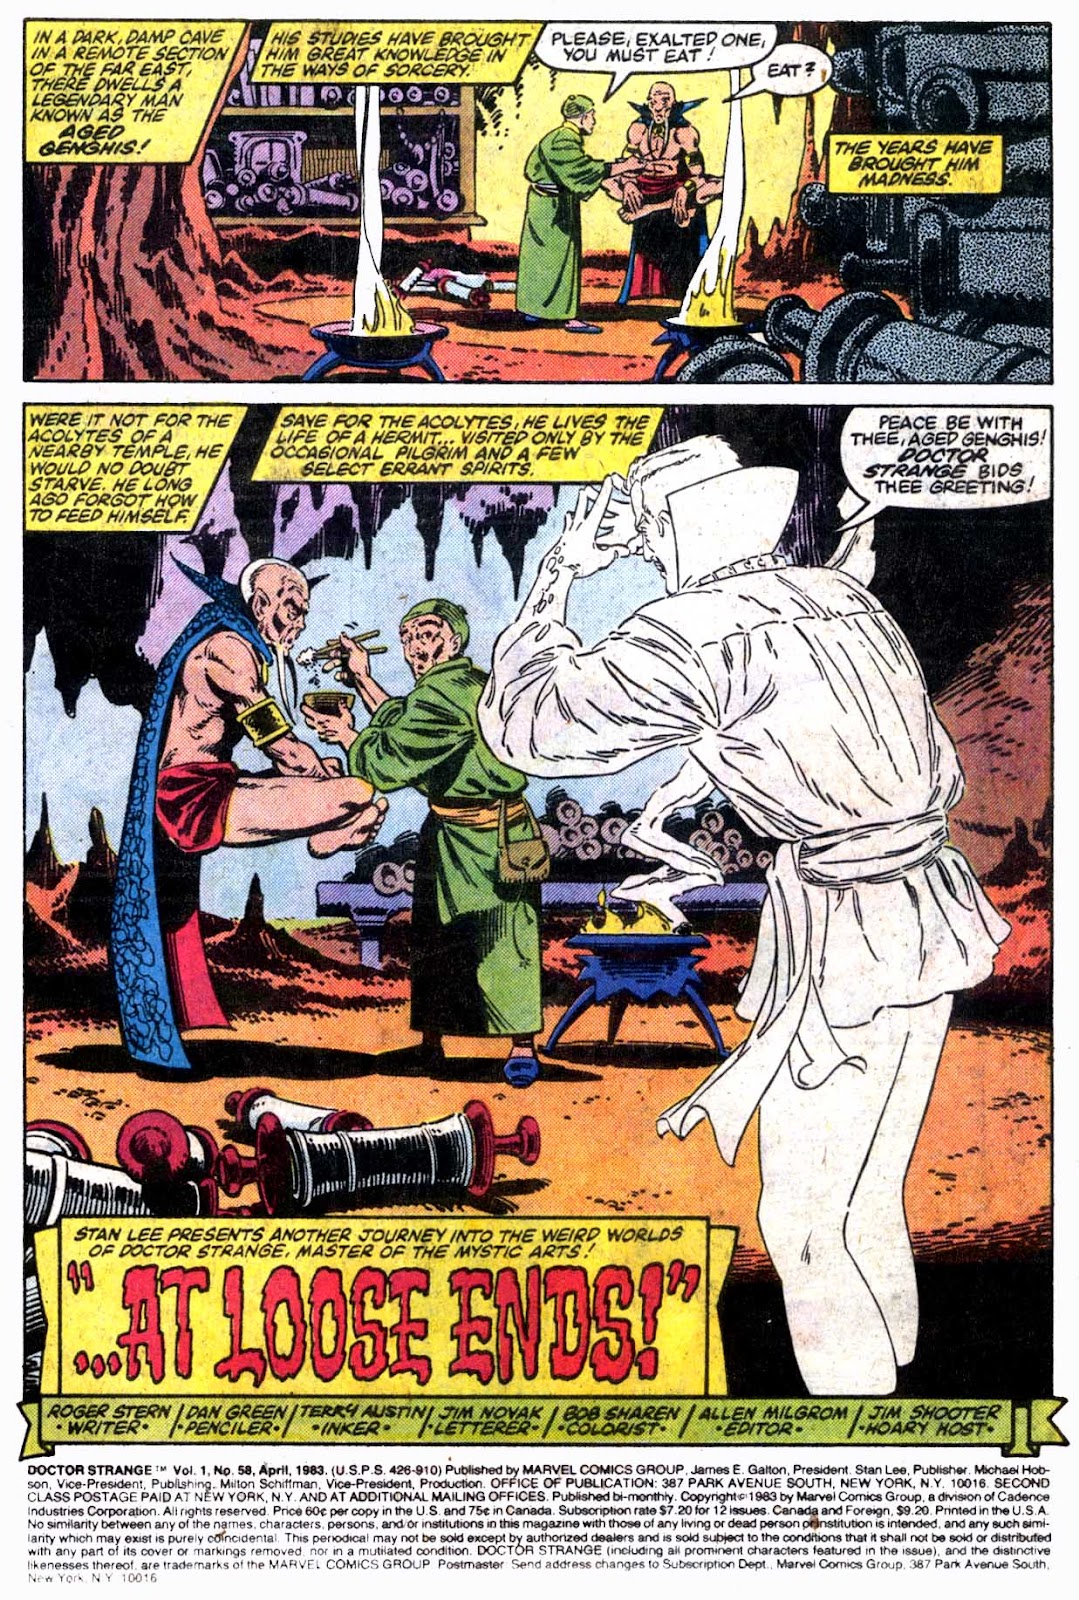 Doctor Strange (1974) issue 58 - Page 2